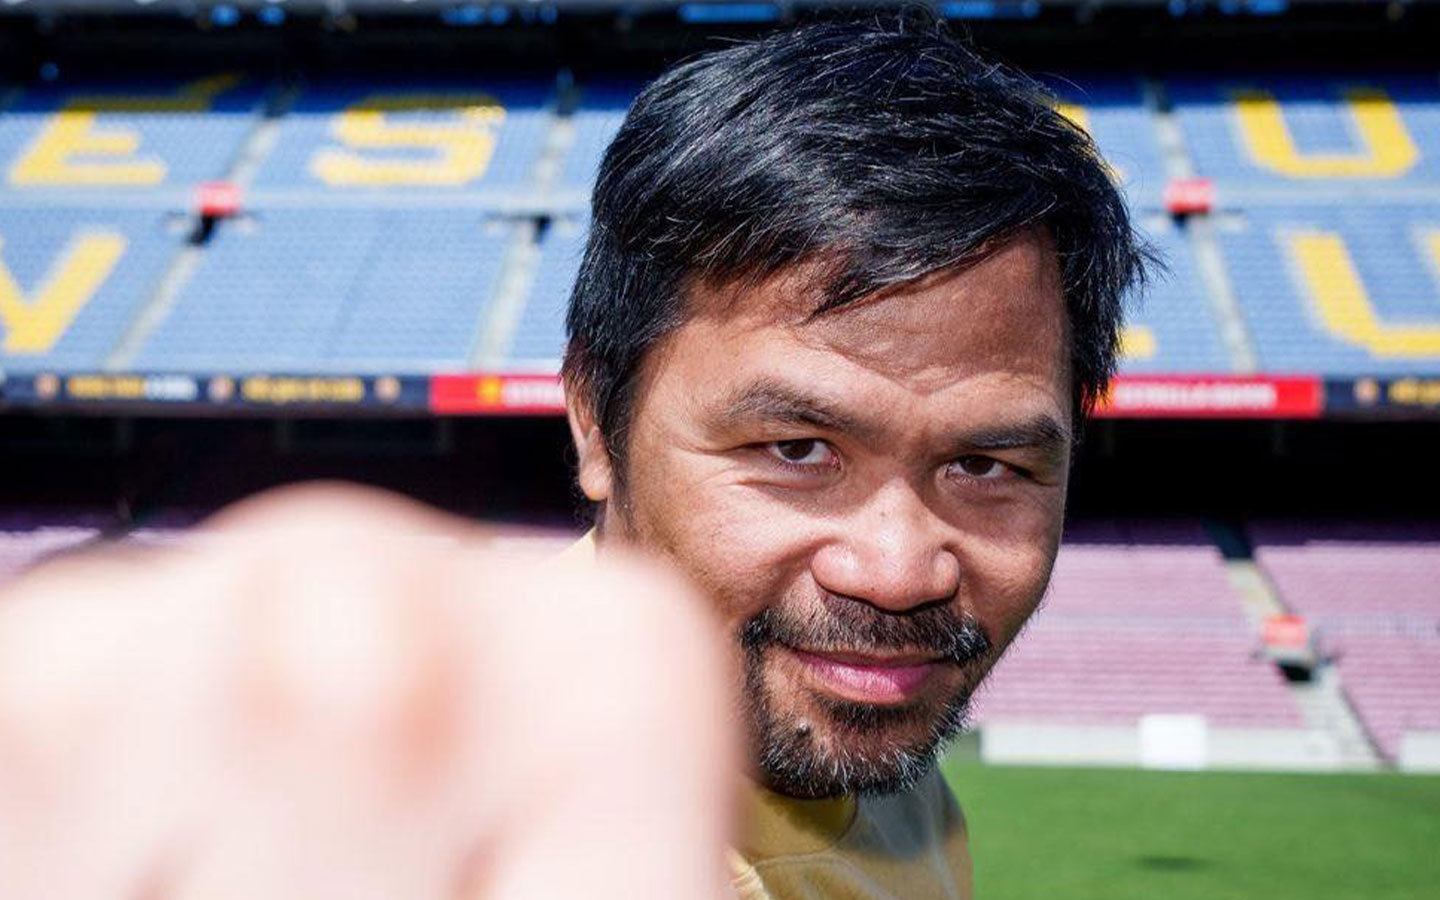 Boxing legends Pacquiao and Banchamek will fight in Macao